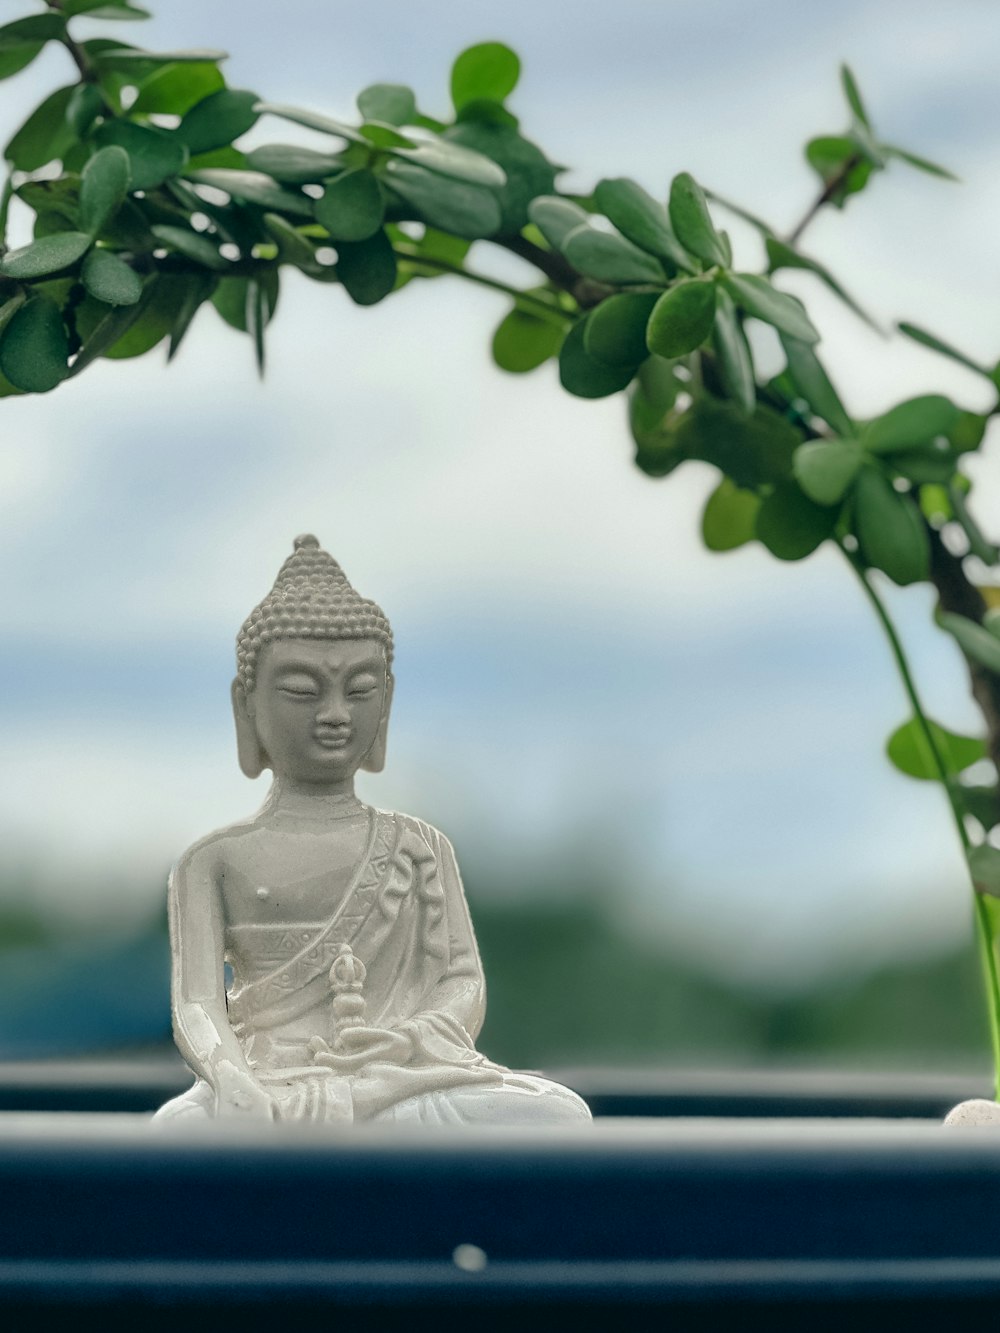 a buddha statue sitting in front of a potted plant